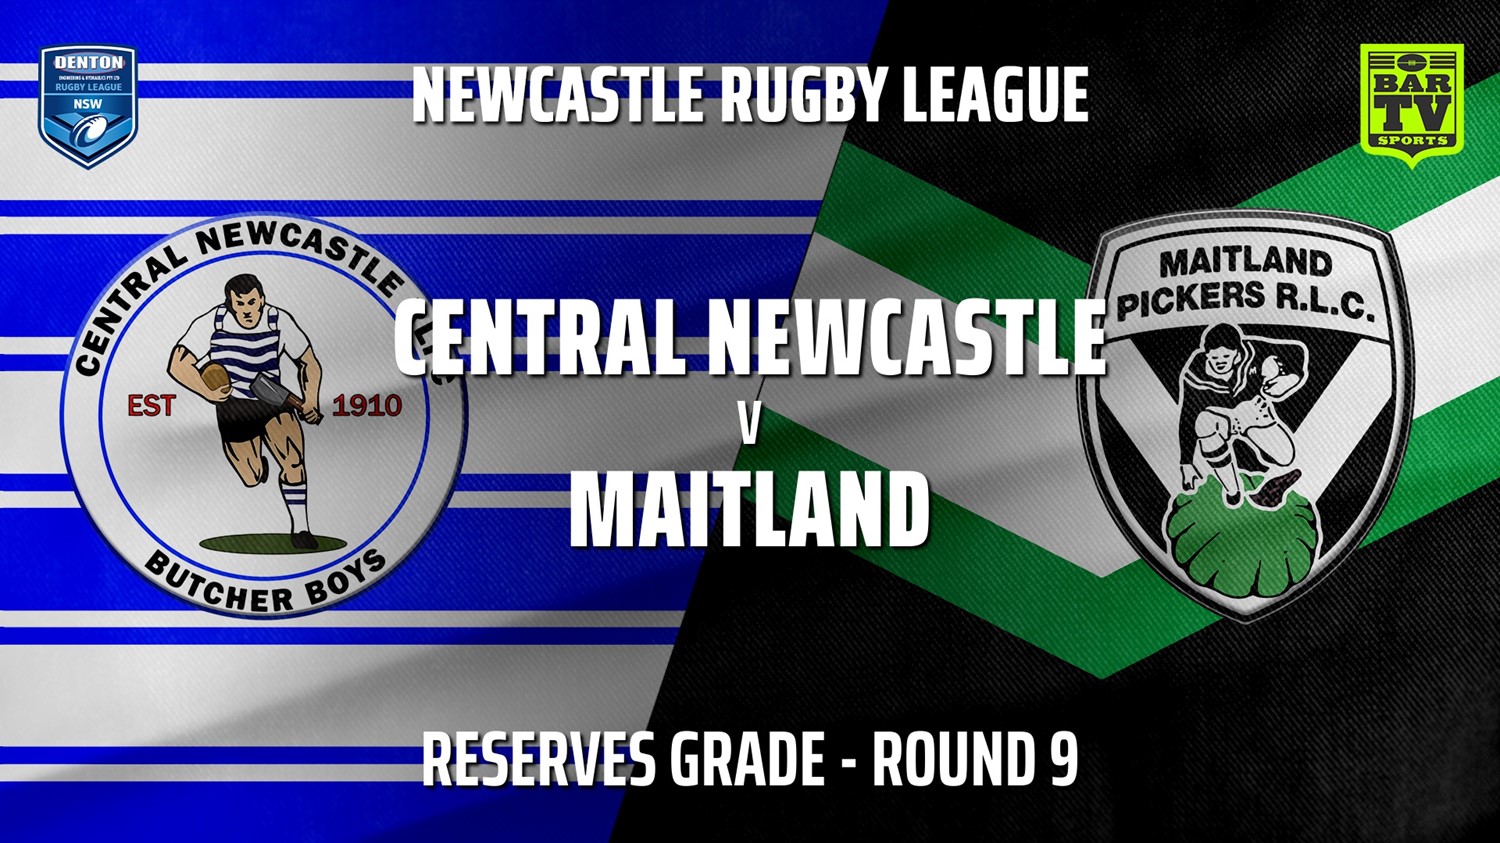 210530-Newcastle Rugby League Round 9 - Reserves Grade - Central Newcastle v Maitland Pickers Slate Image